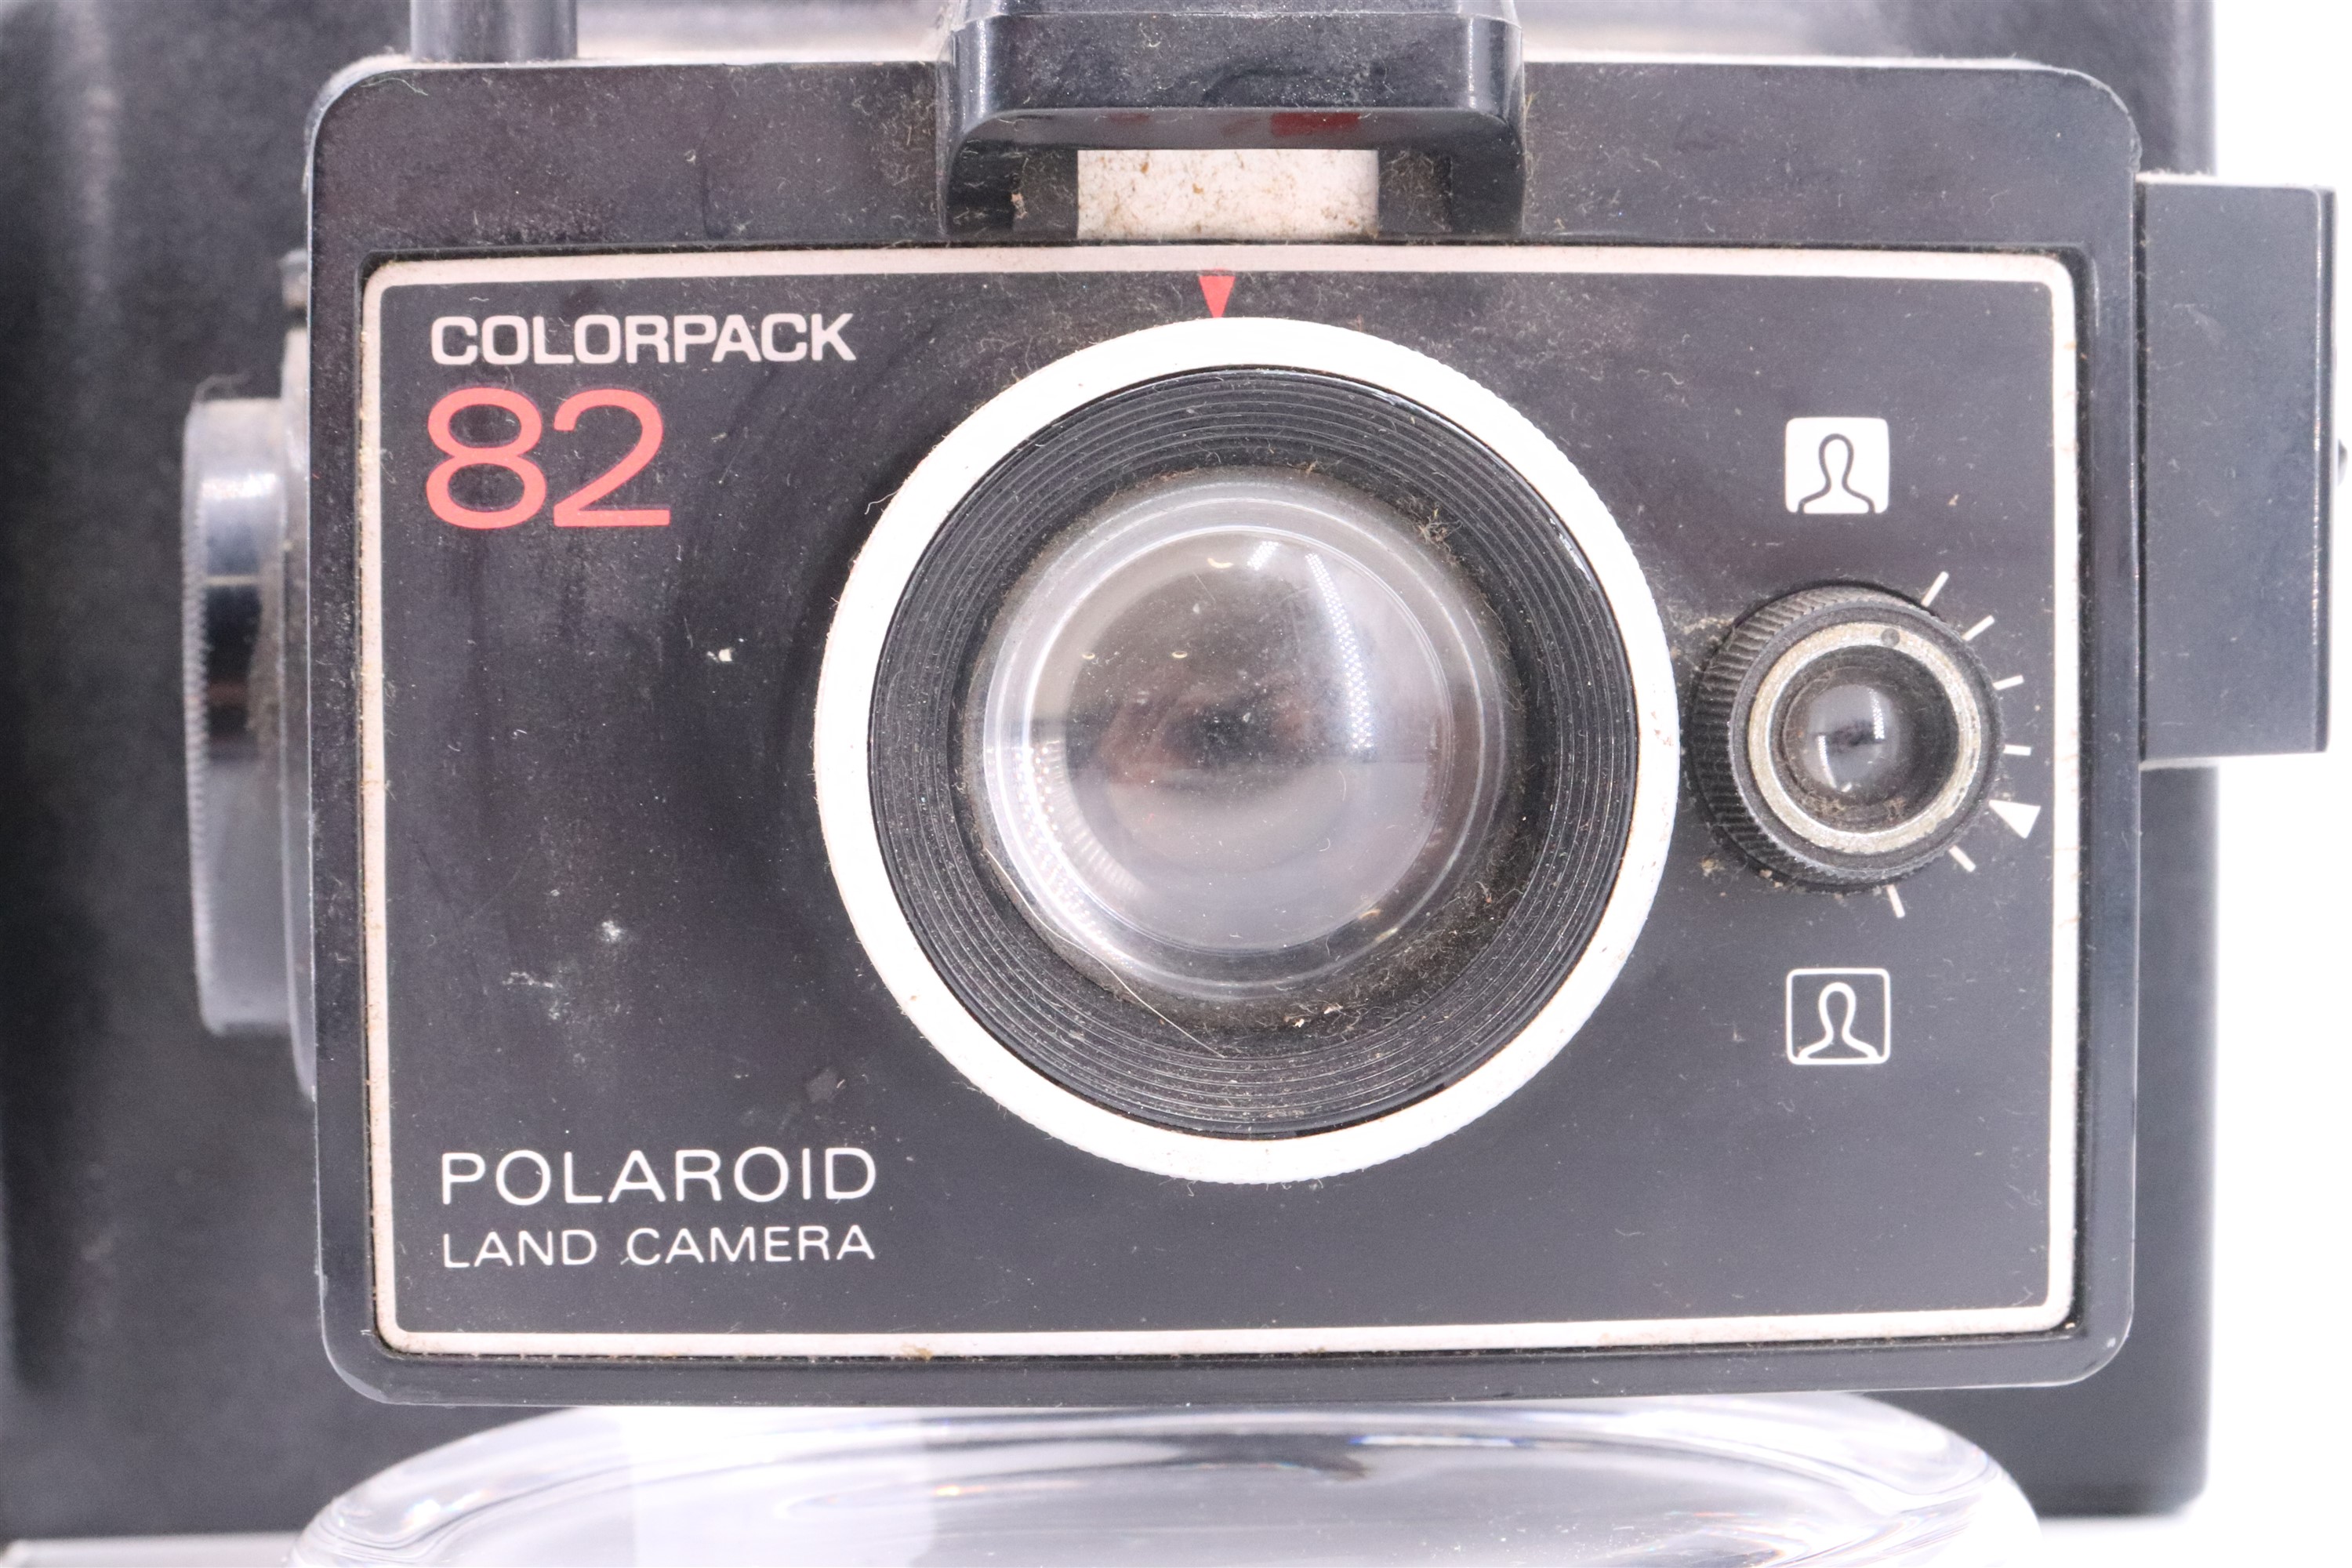 An Olympia "Regula Auto - Set II" camera together with a Polaroid "Colorpack 82" land camera - Image 2 of 4